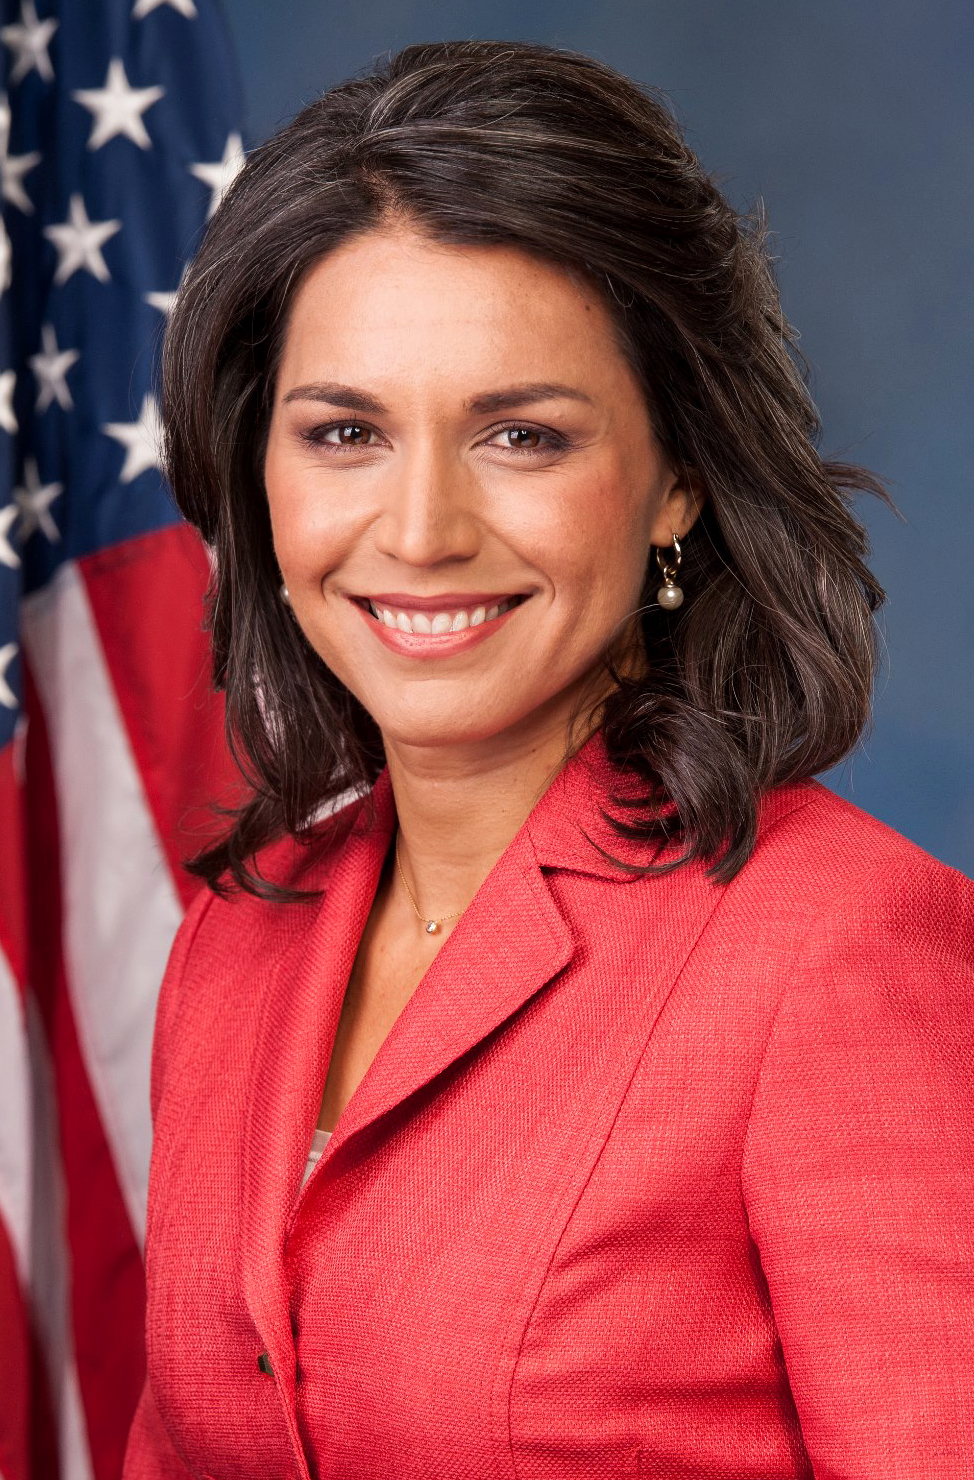 https://creativedestructionmedia.com/news/politics/2022/10/11/tulsi-gabbard-quits-democratic-party-that-is-under-the-complete-control-of-an-elitist-cabal-of-warmongers/